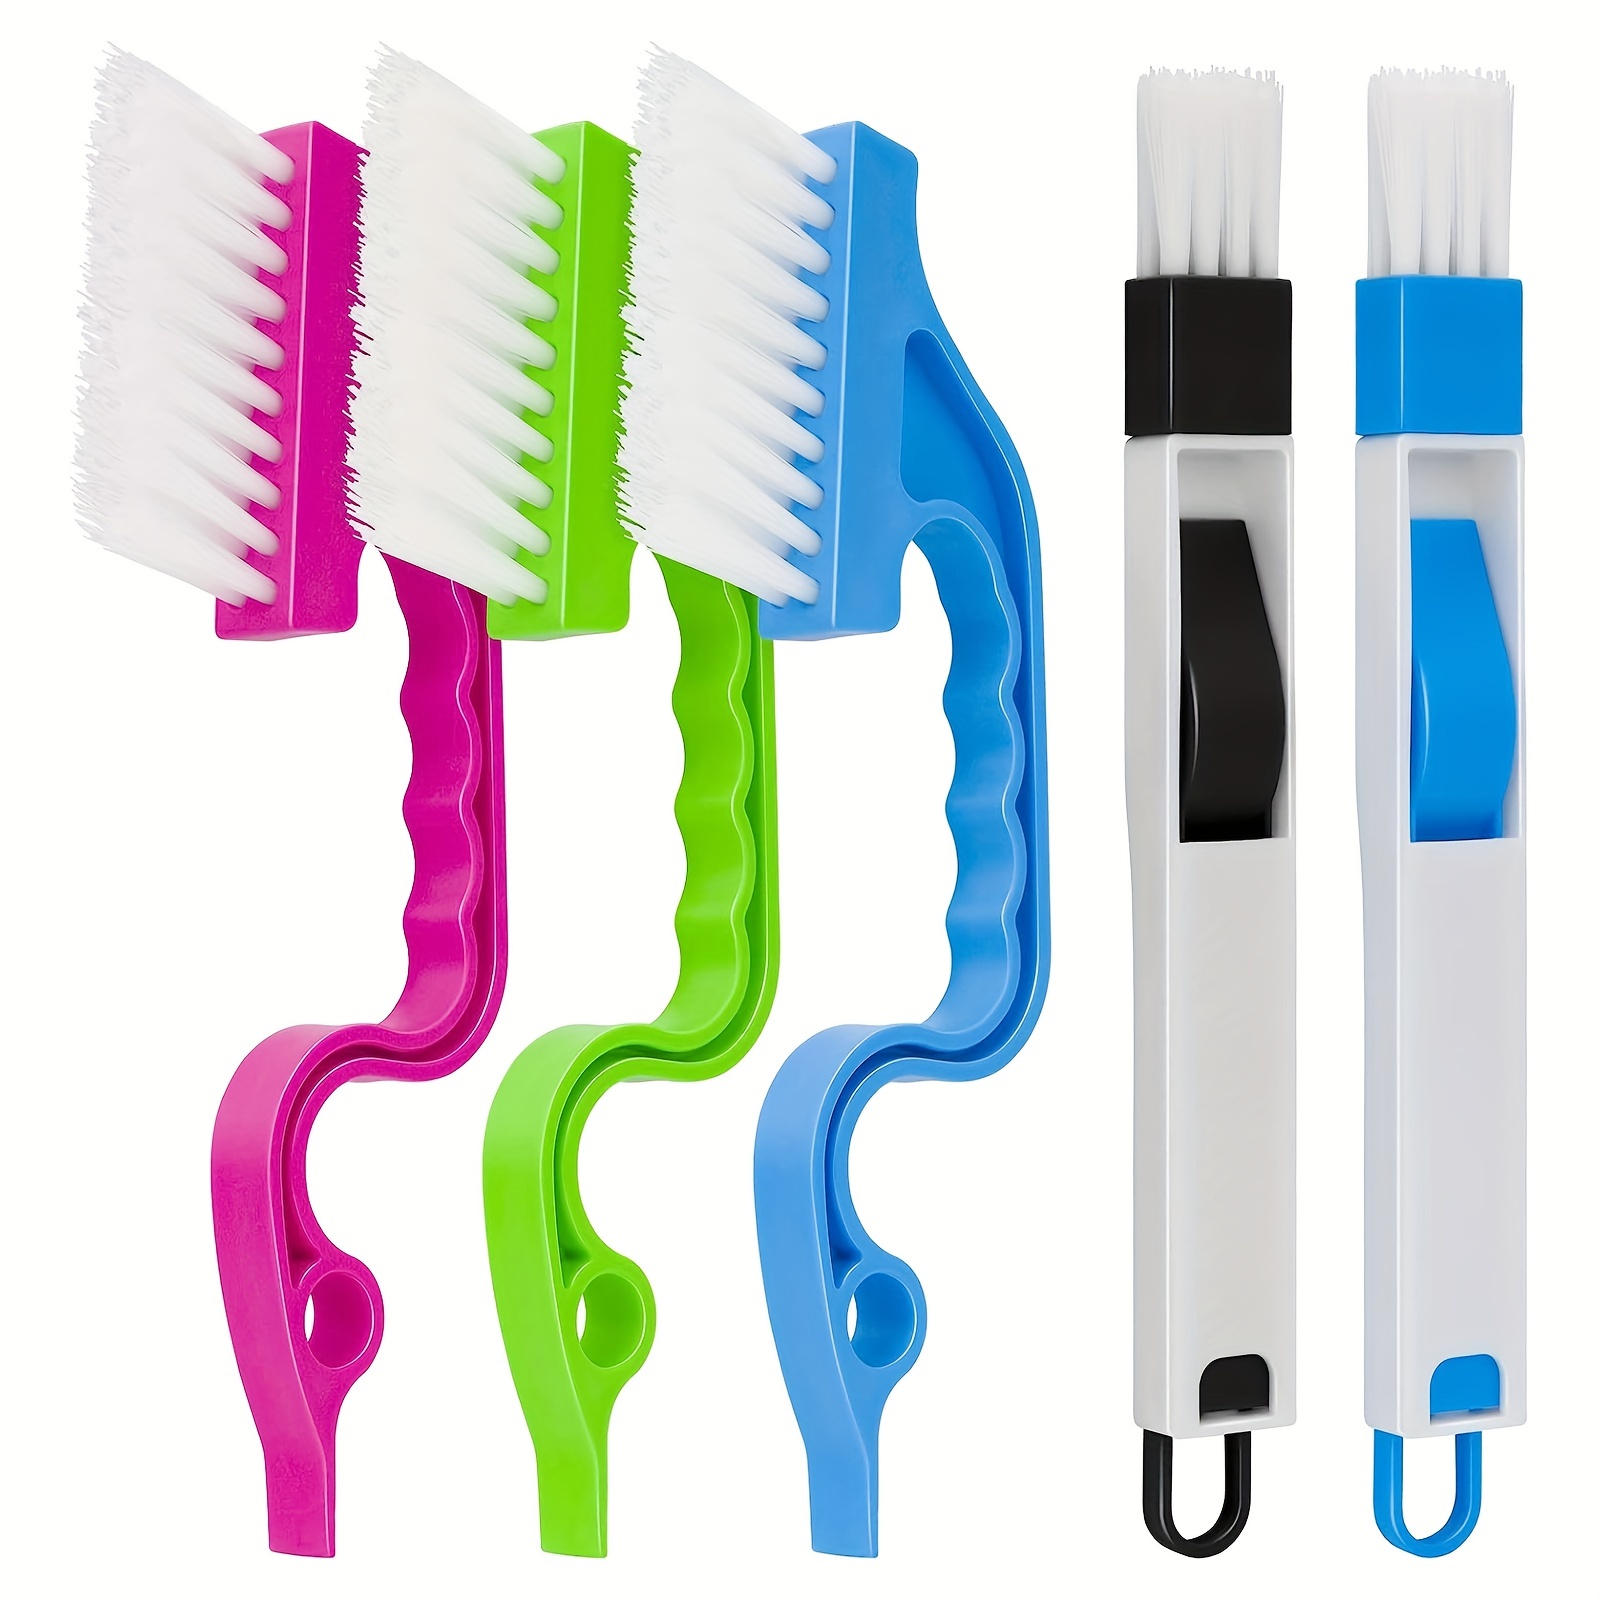 Hand-held Groove Cleaning Tools, Window Track Cleaning Brush